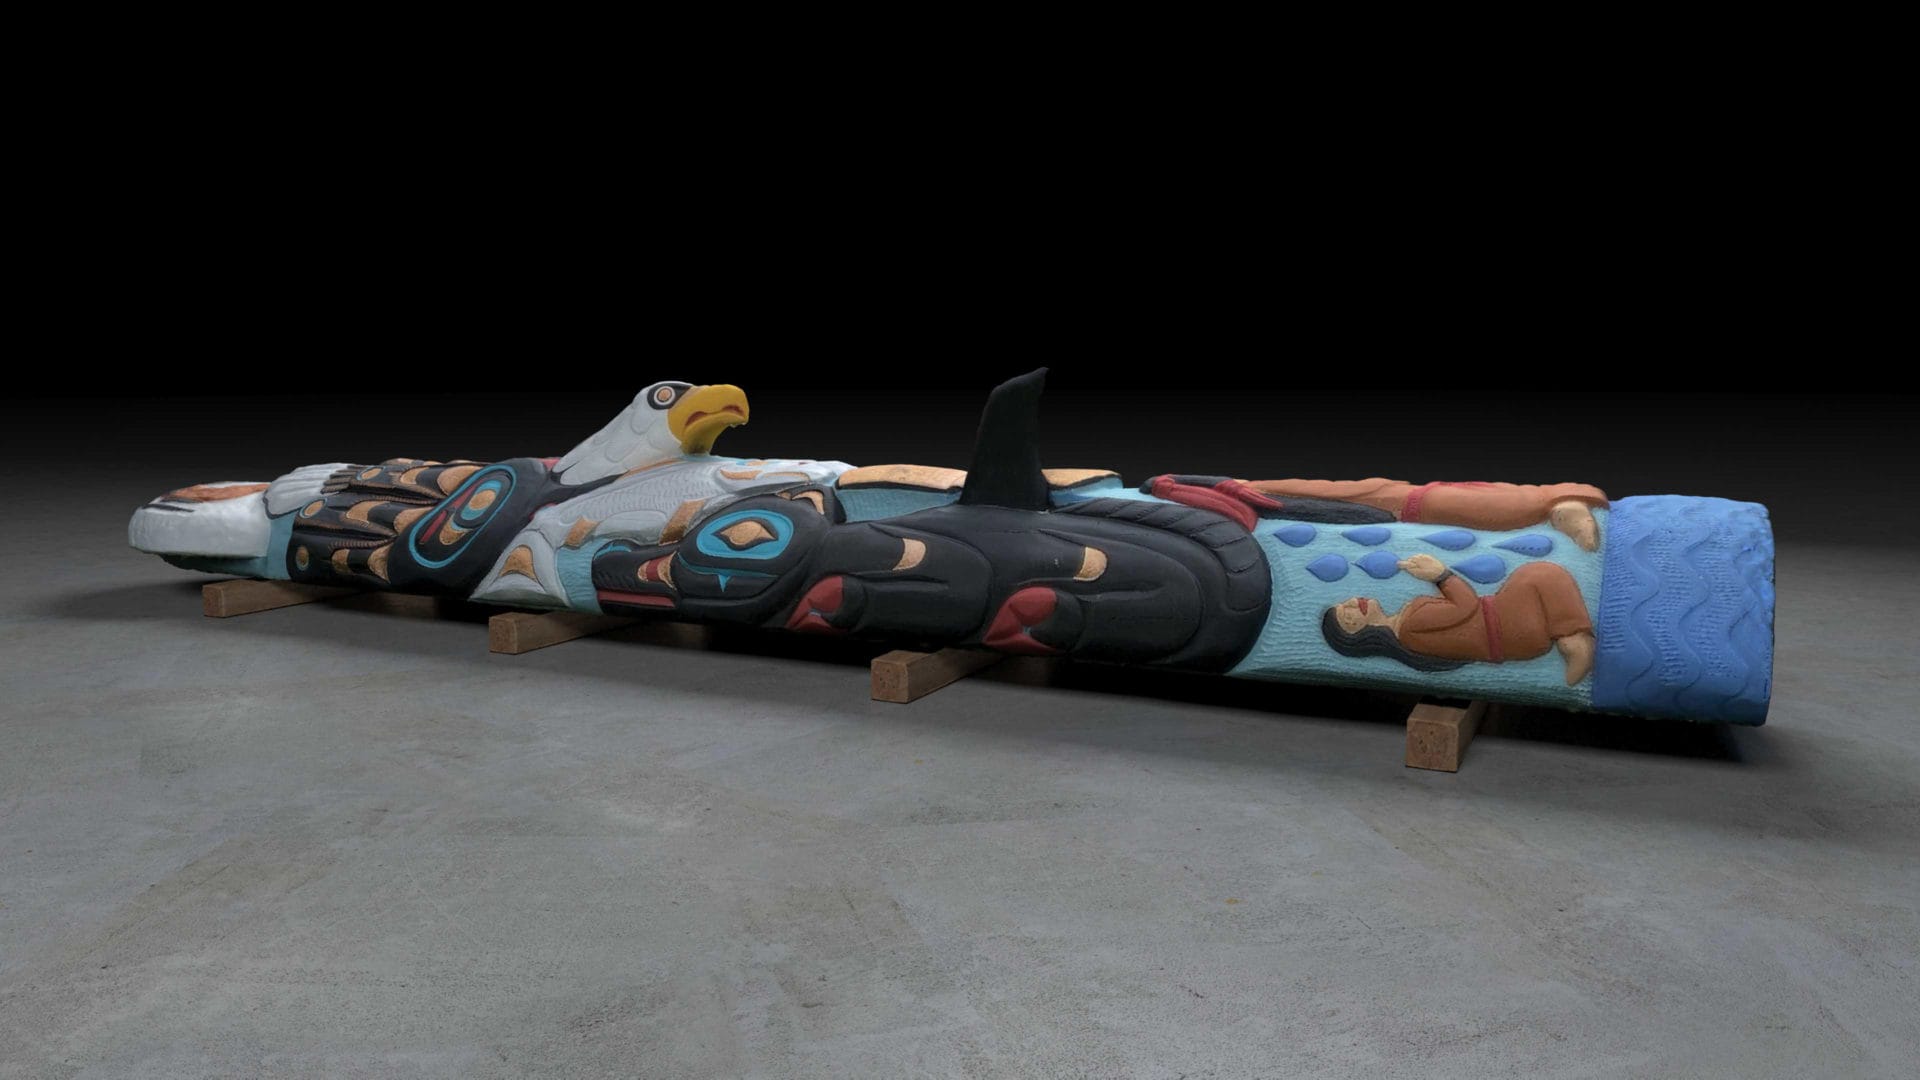 A 25-foot-tall, 5,000-lb painted and carved totem pole